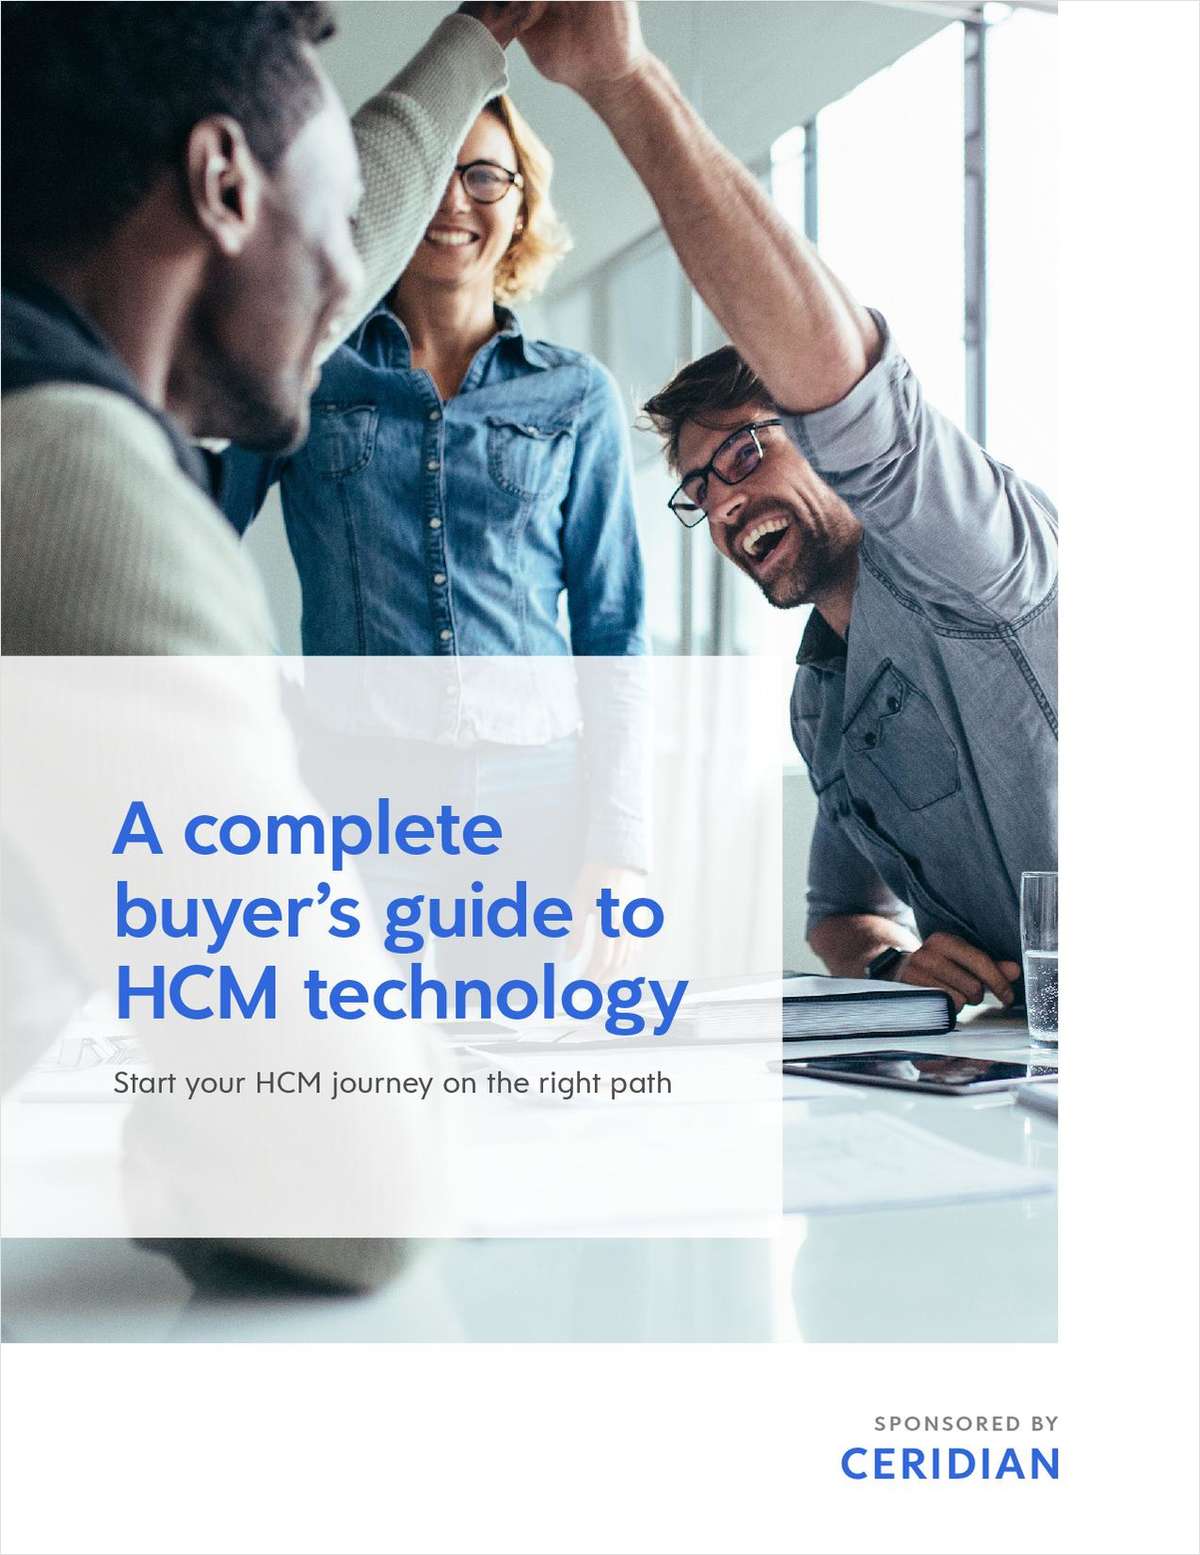 A Complete Buyer's Guide to HCM Technology